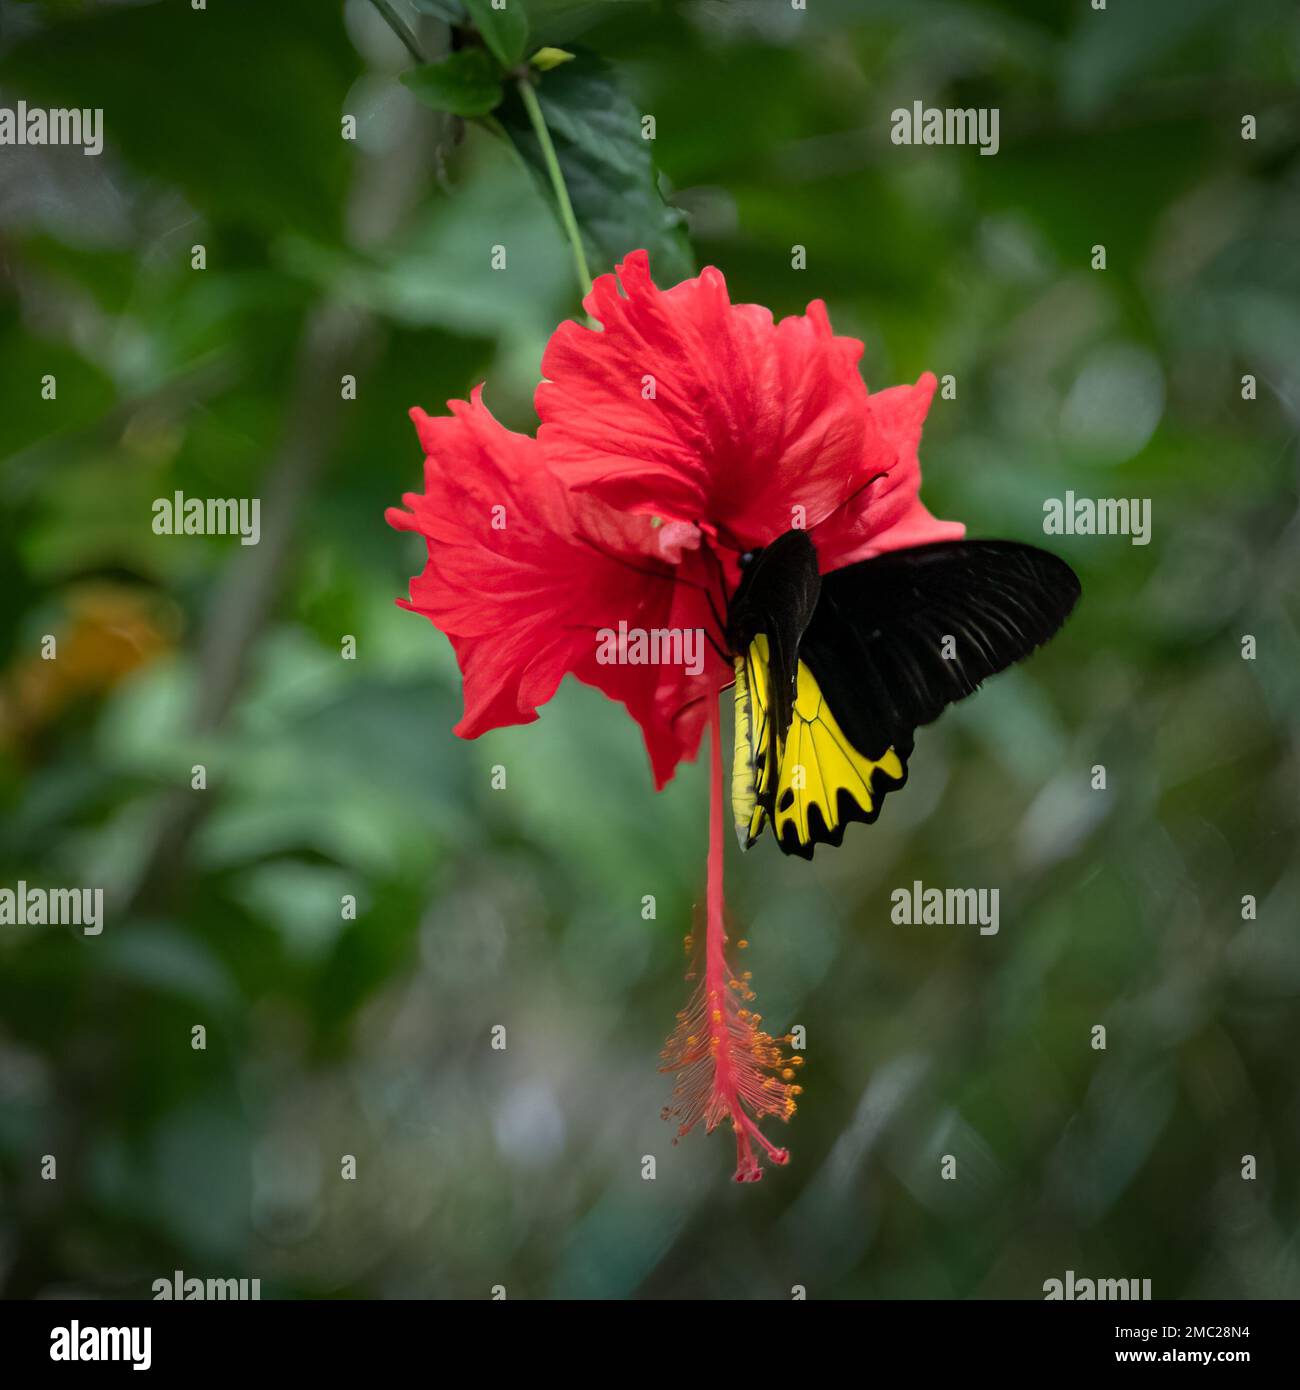 Malayan Birdwing Butterfly (Triodes amphysus) on Hibiscus Stock Photo